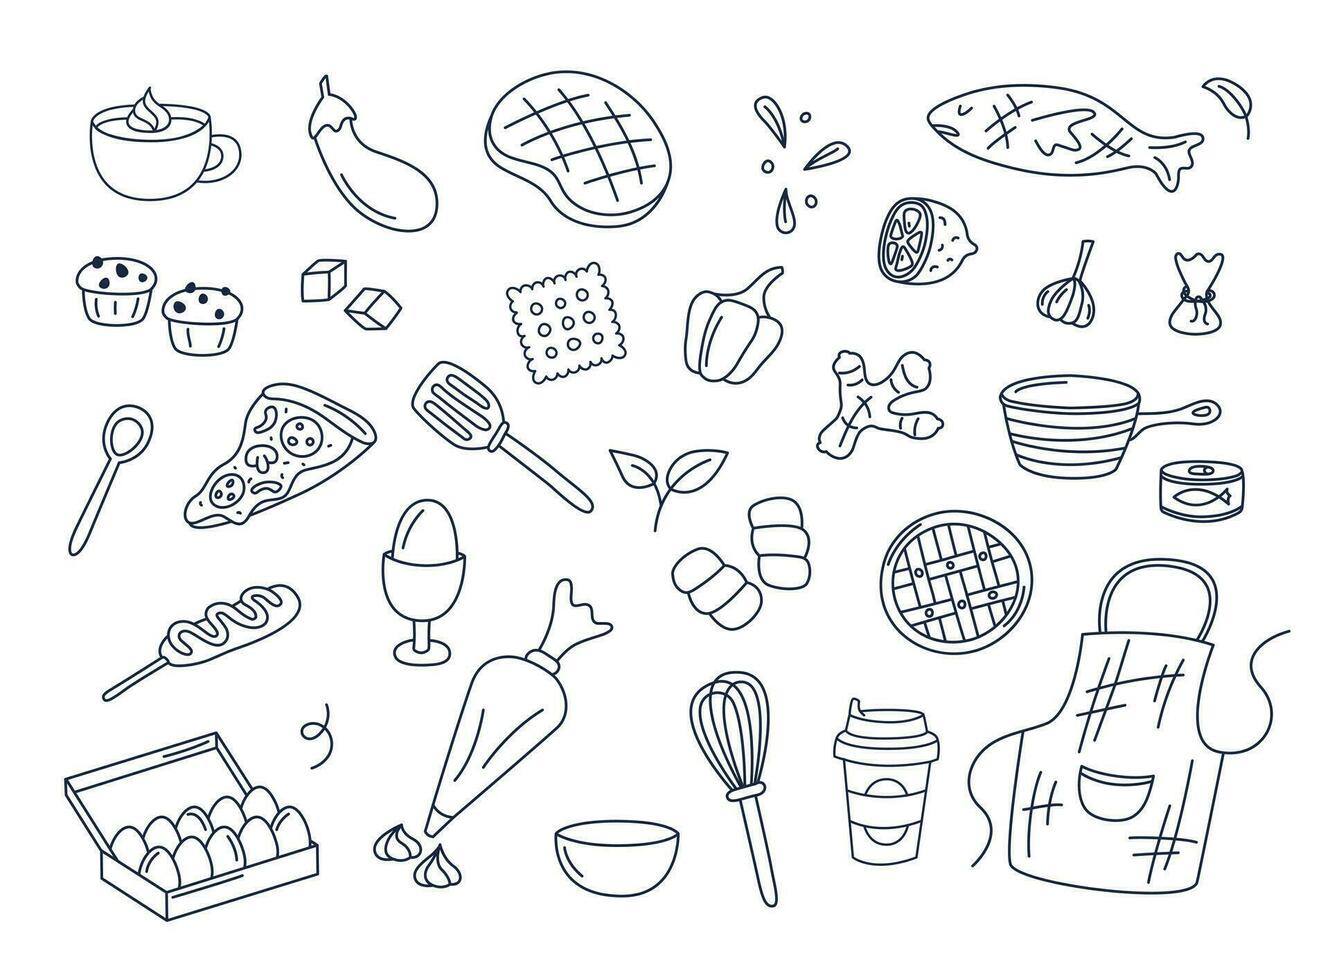 Cooking doodles vector set of isolated elements. Cute doodle illustrations collection of utensils, kitchenware, food, meal ingredients, kitchen objects. Fruits, vegetables, bakery on white background